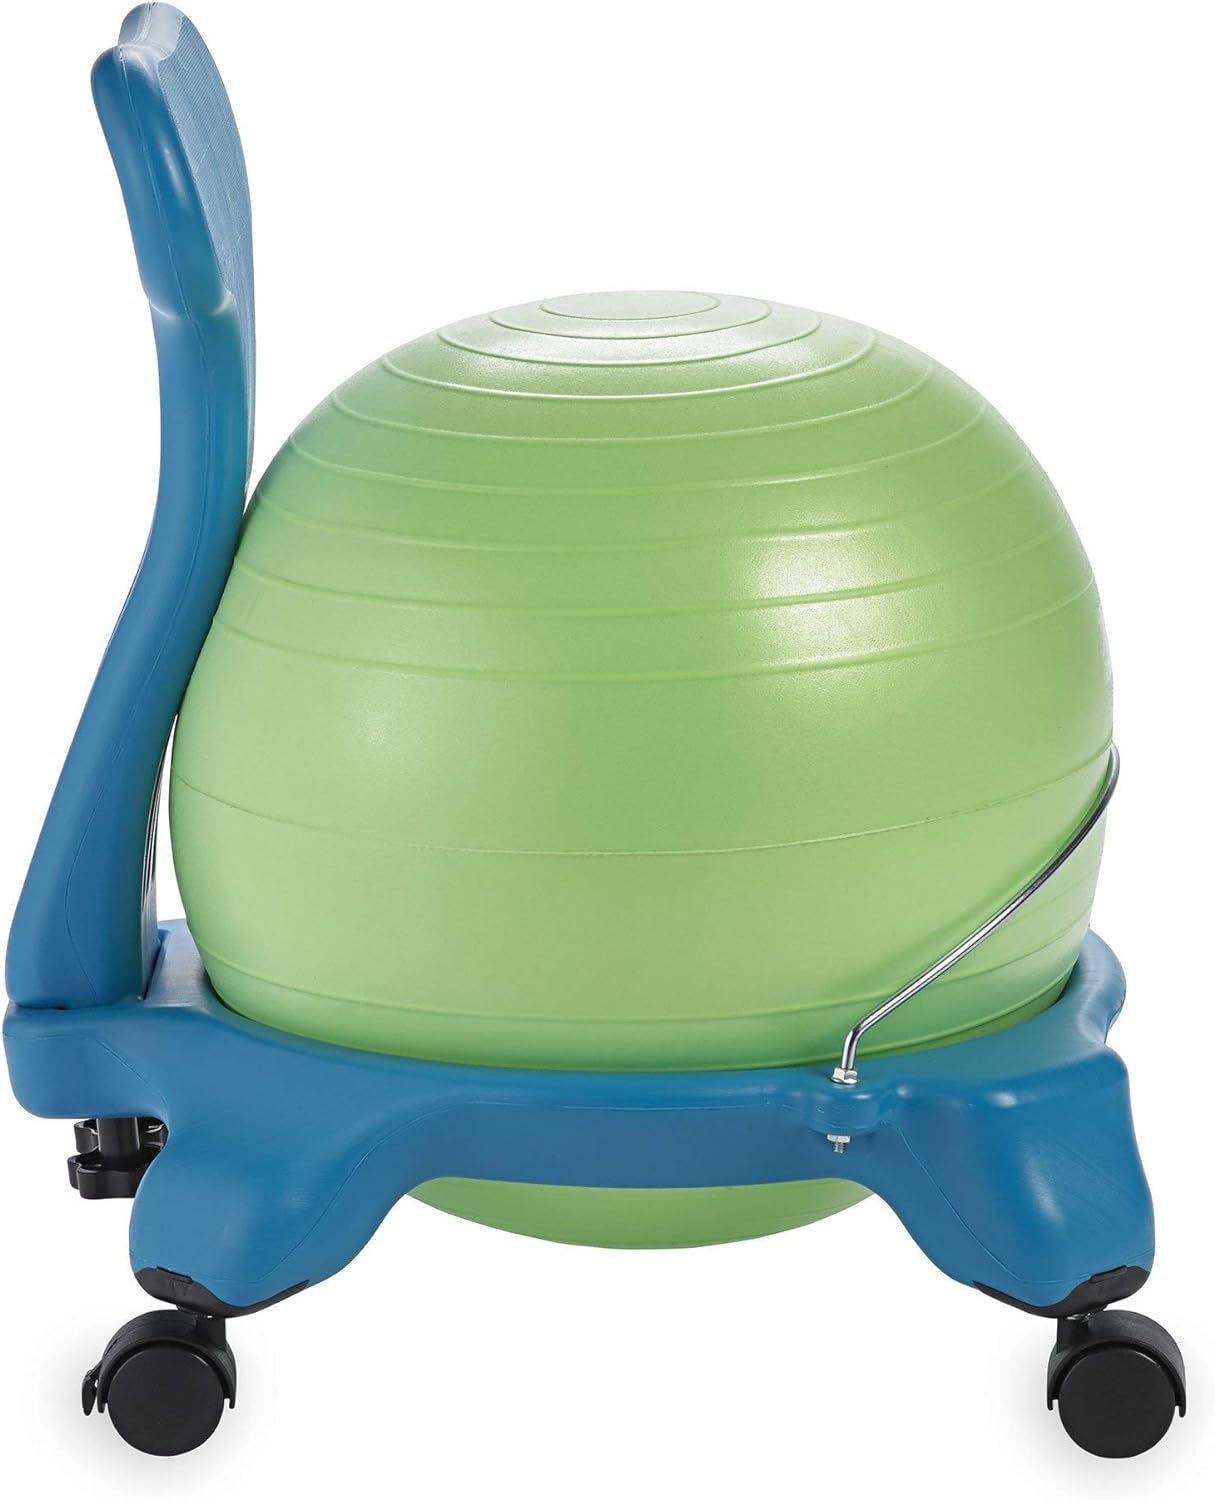 Gaiam Kids Balance Ball Chair - Classic Children's Stability Ball Chair, Alternative School Classroom Flexible Desk Seating for Active Students with Satisfaction Guarantee, Blue/Green